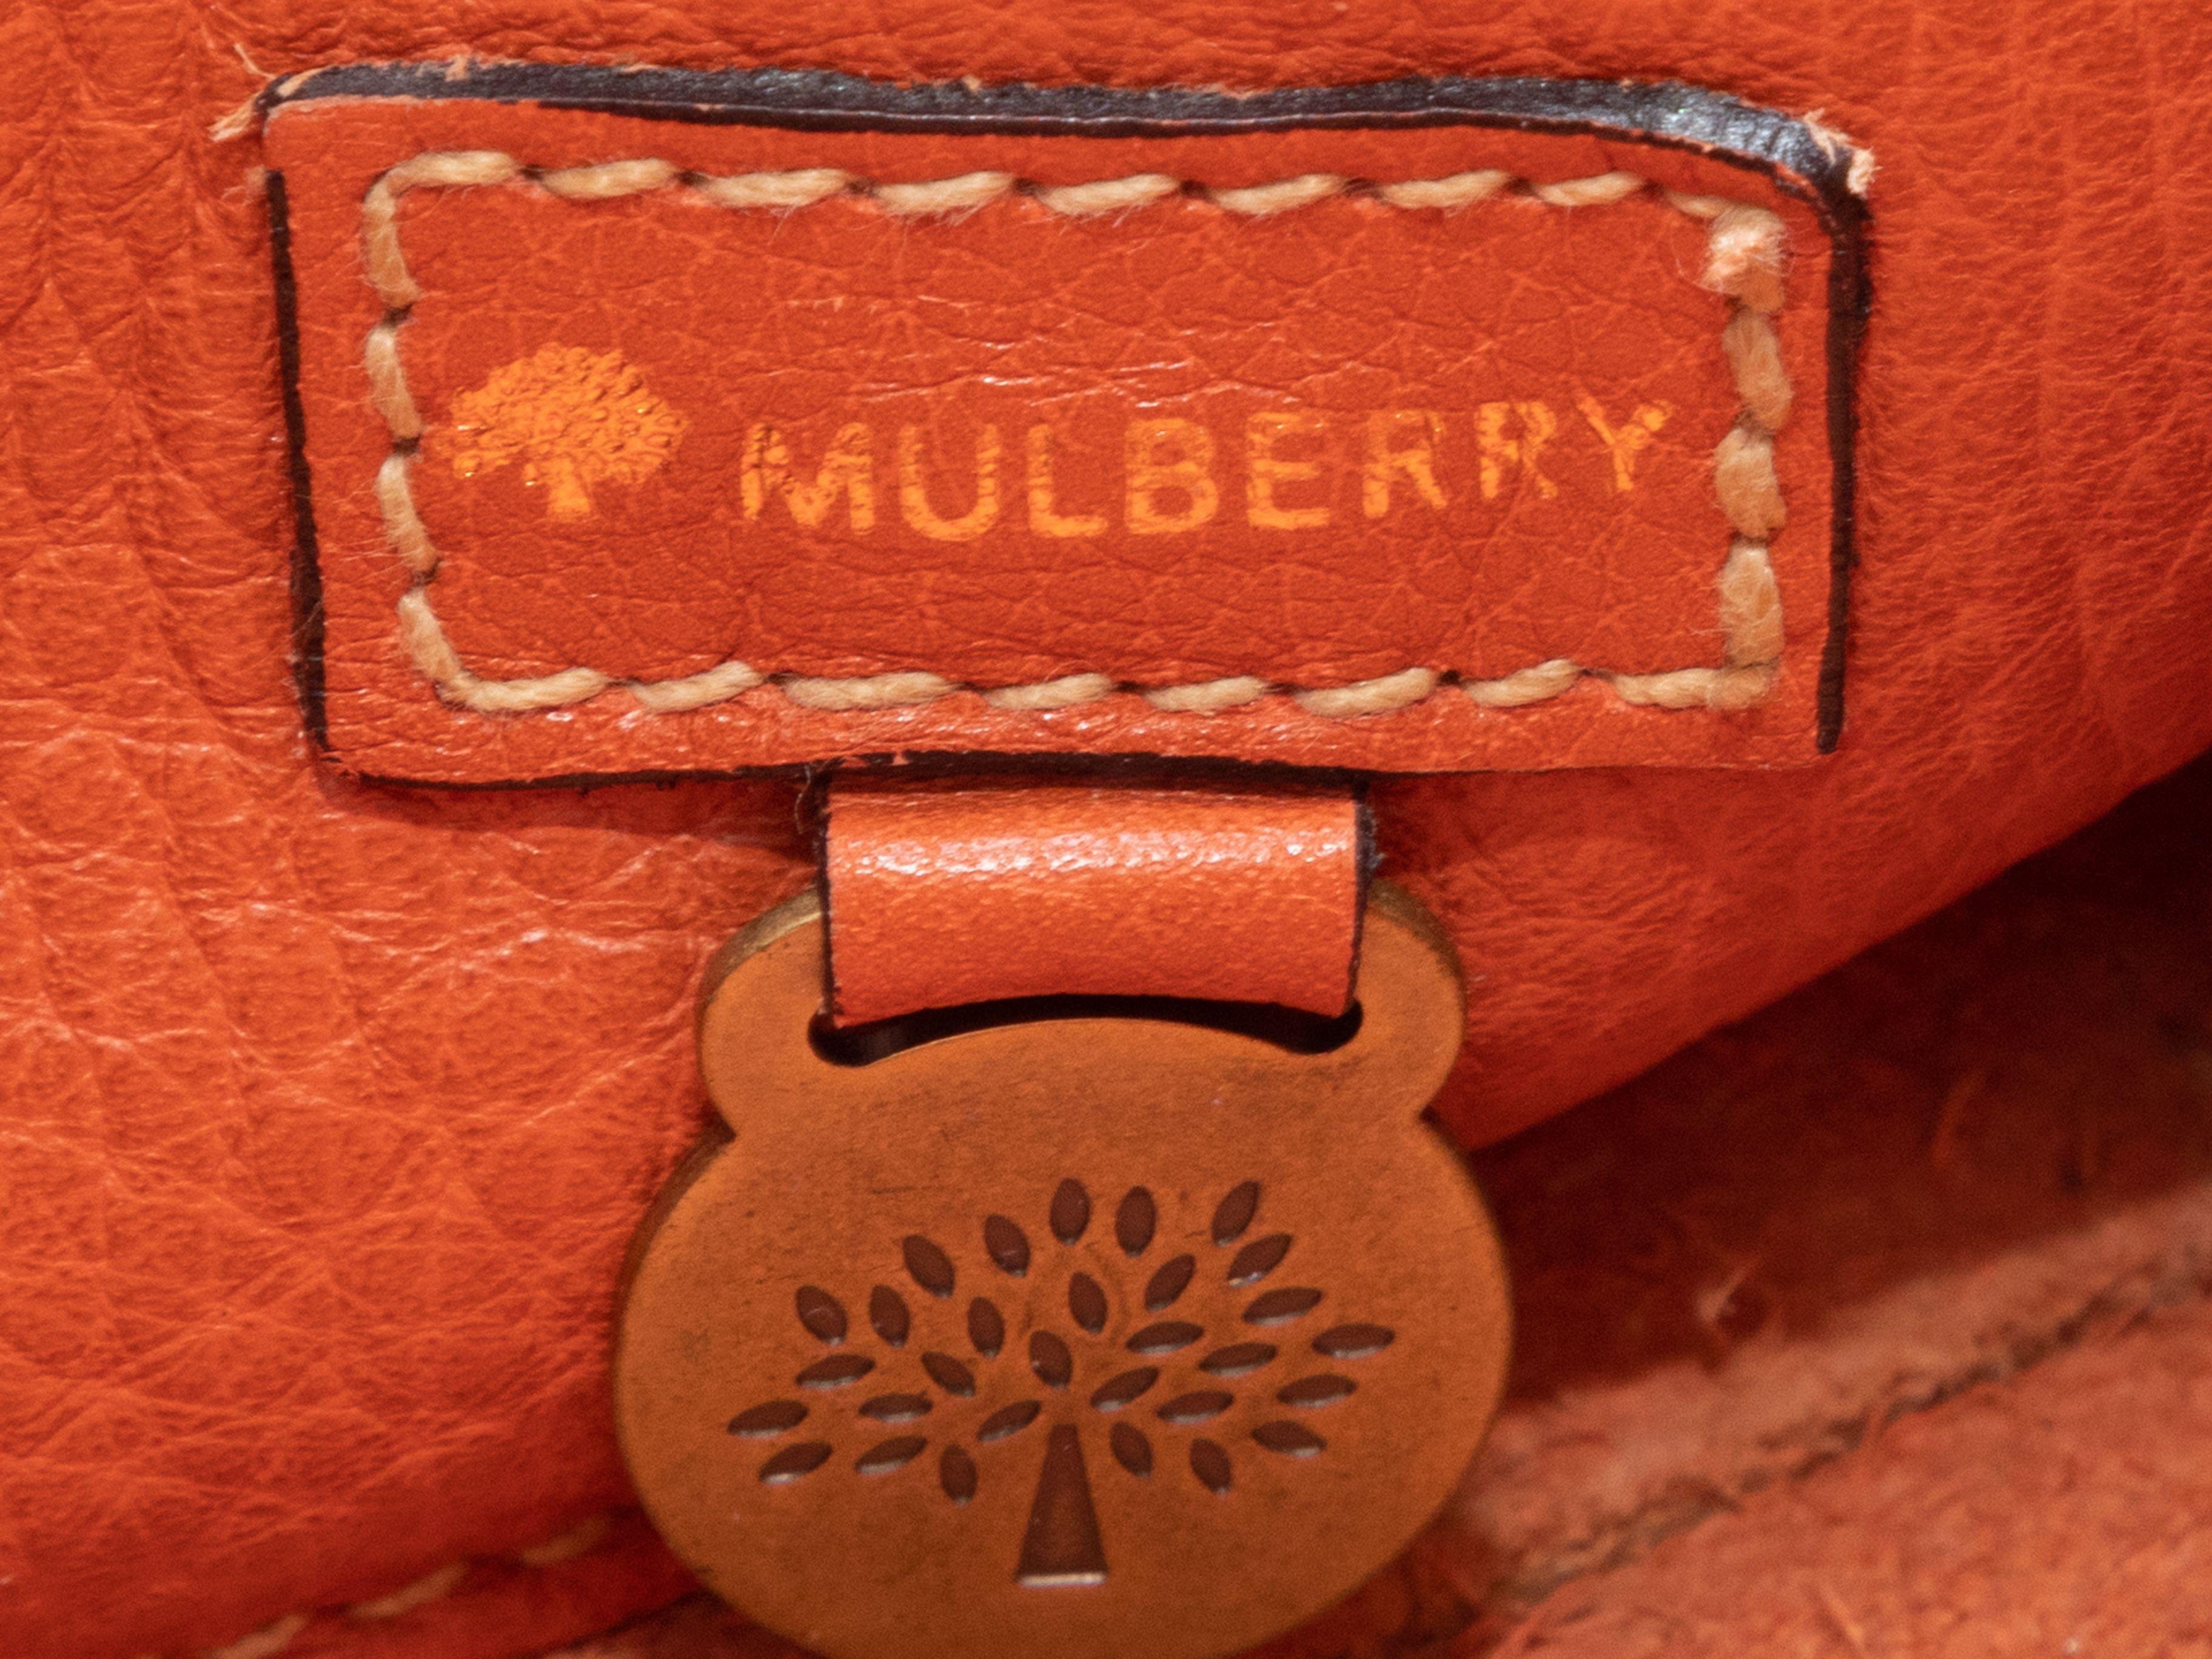 Product Details: Orange Mulberry Bayswater Leather Handbag. The Bayswater Handbag features a leather body, brown leather trim, gold-tone hardware, dual rolled shoulder straps, and a front flap turn-lock closure. 14.5